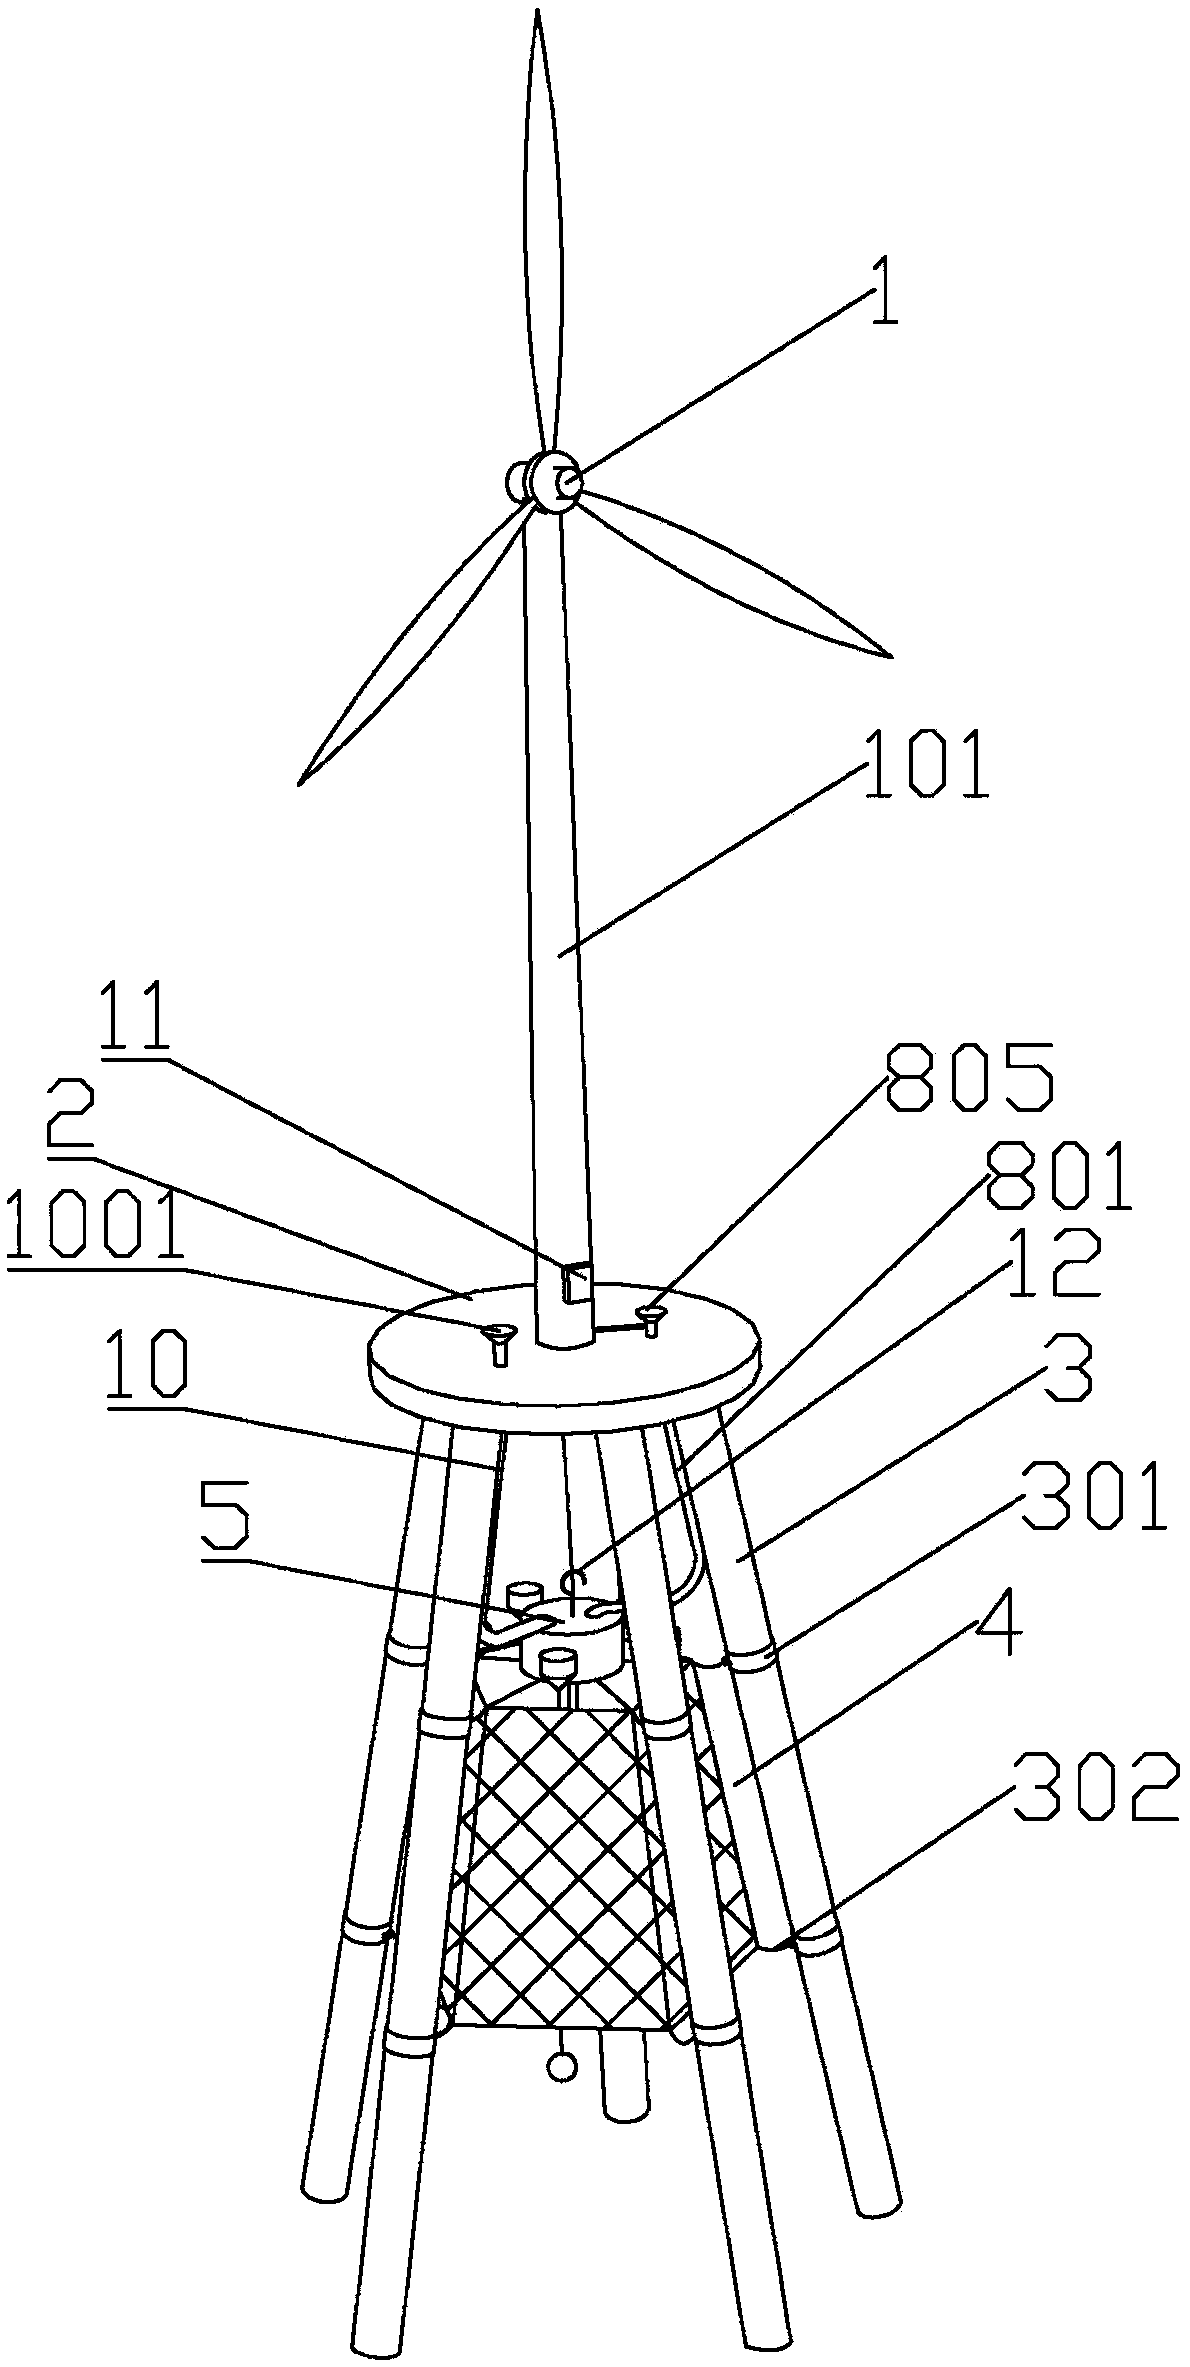 Culture net cage equipment based on high-pile cushion cap foundation of offshore wind turbine